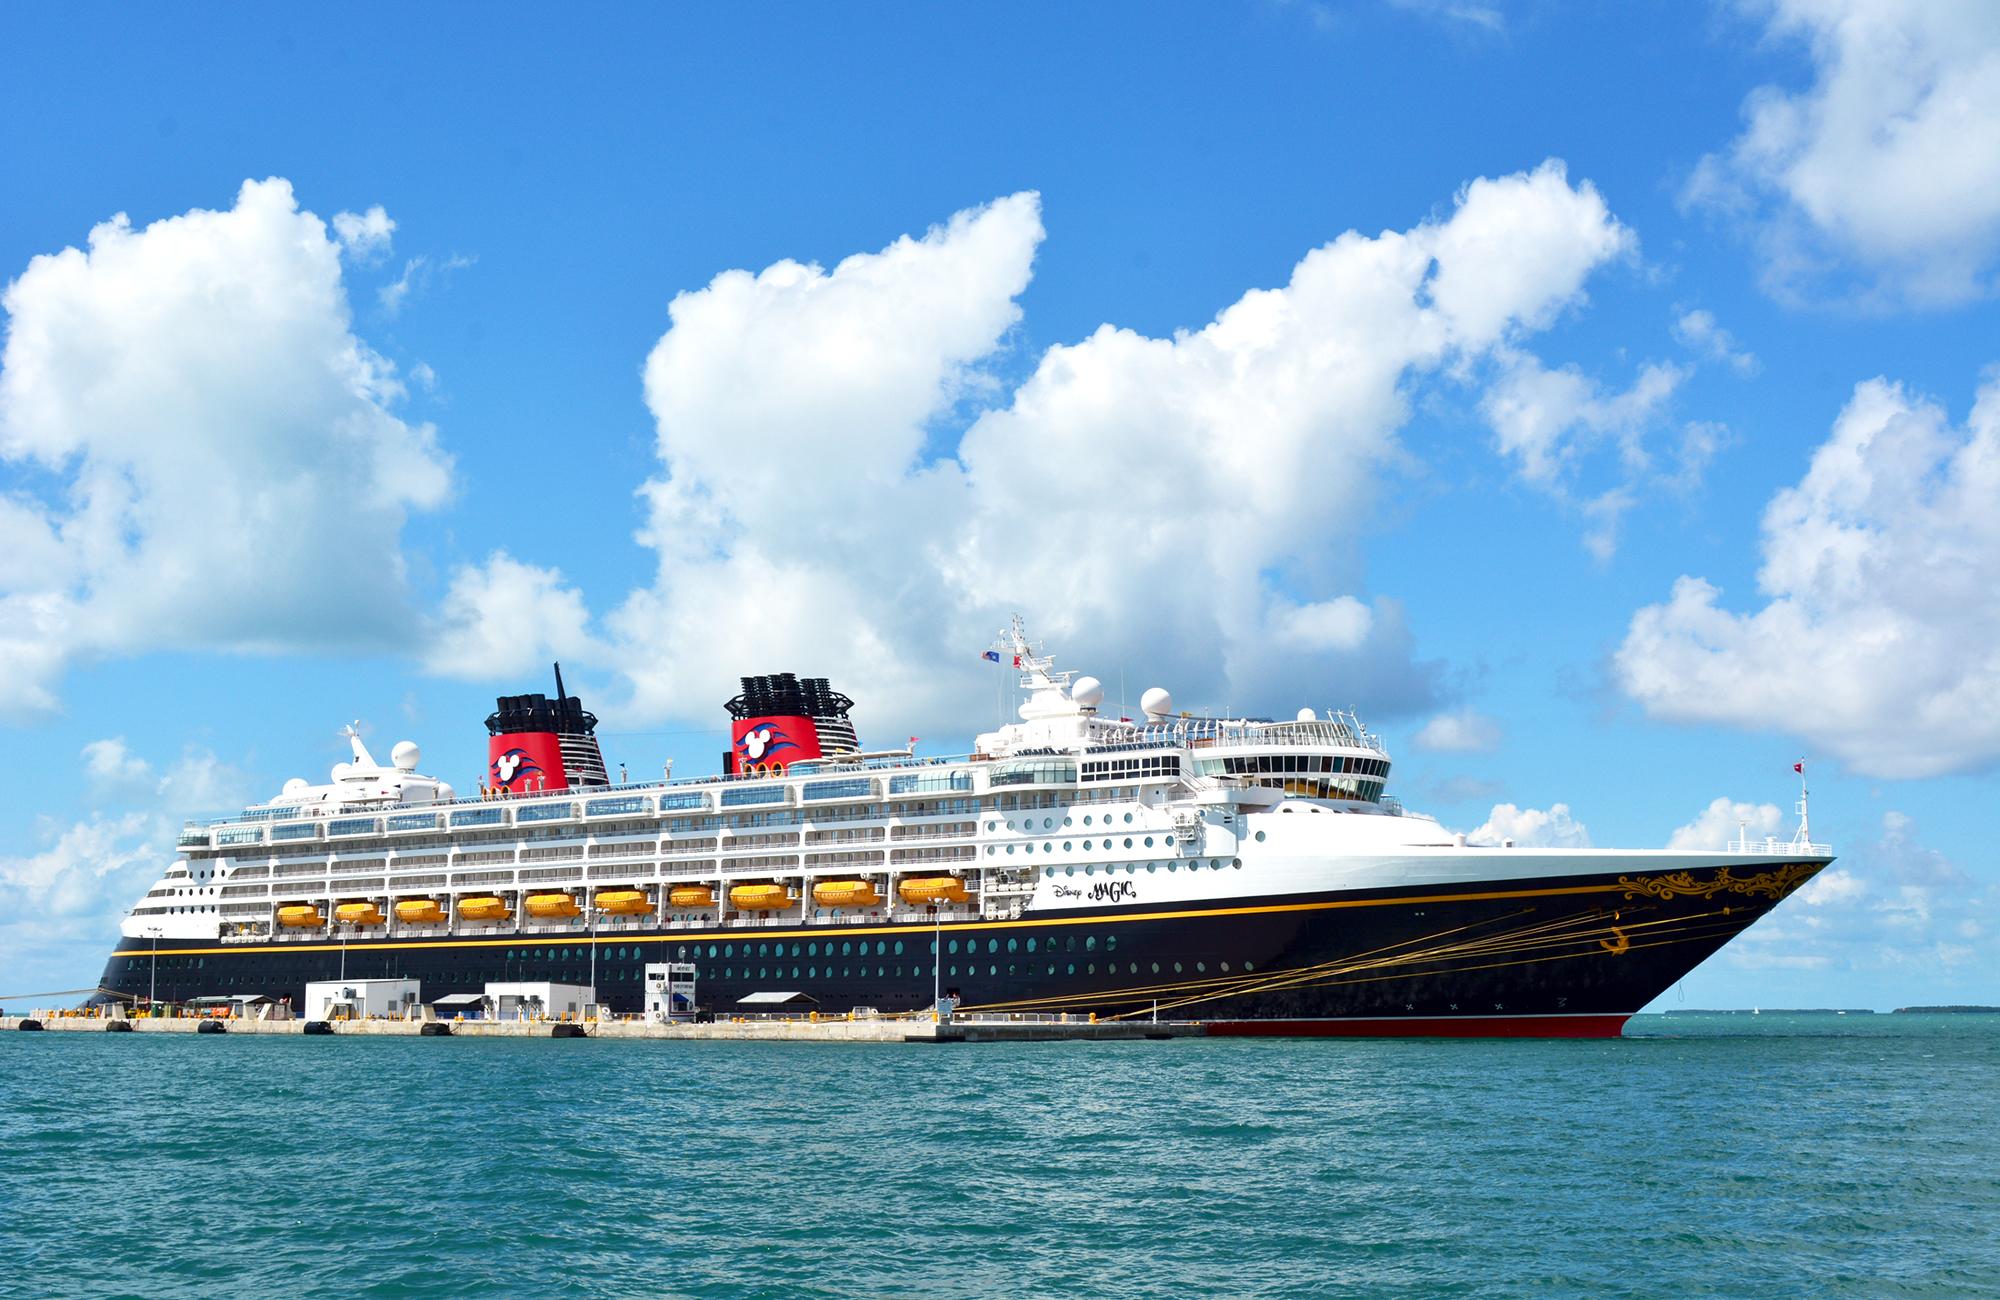 Tips, Tricks, and Things to Know Before You Go on a Disney Cruise